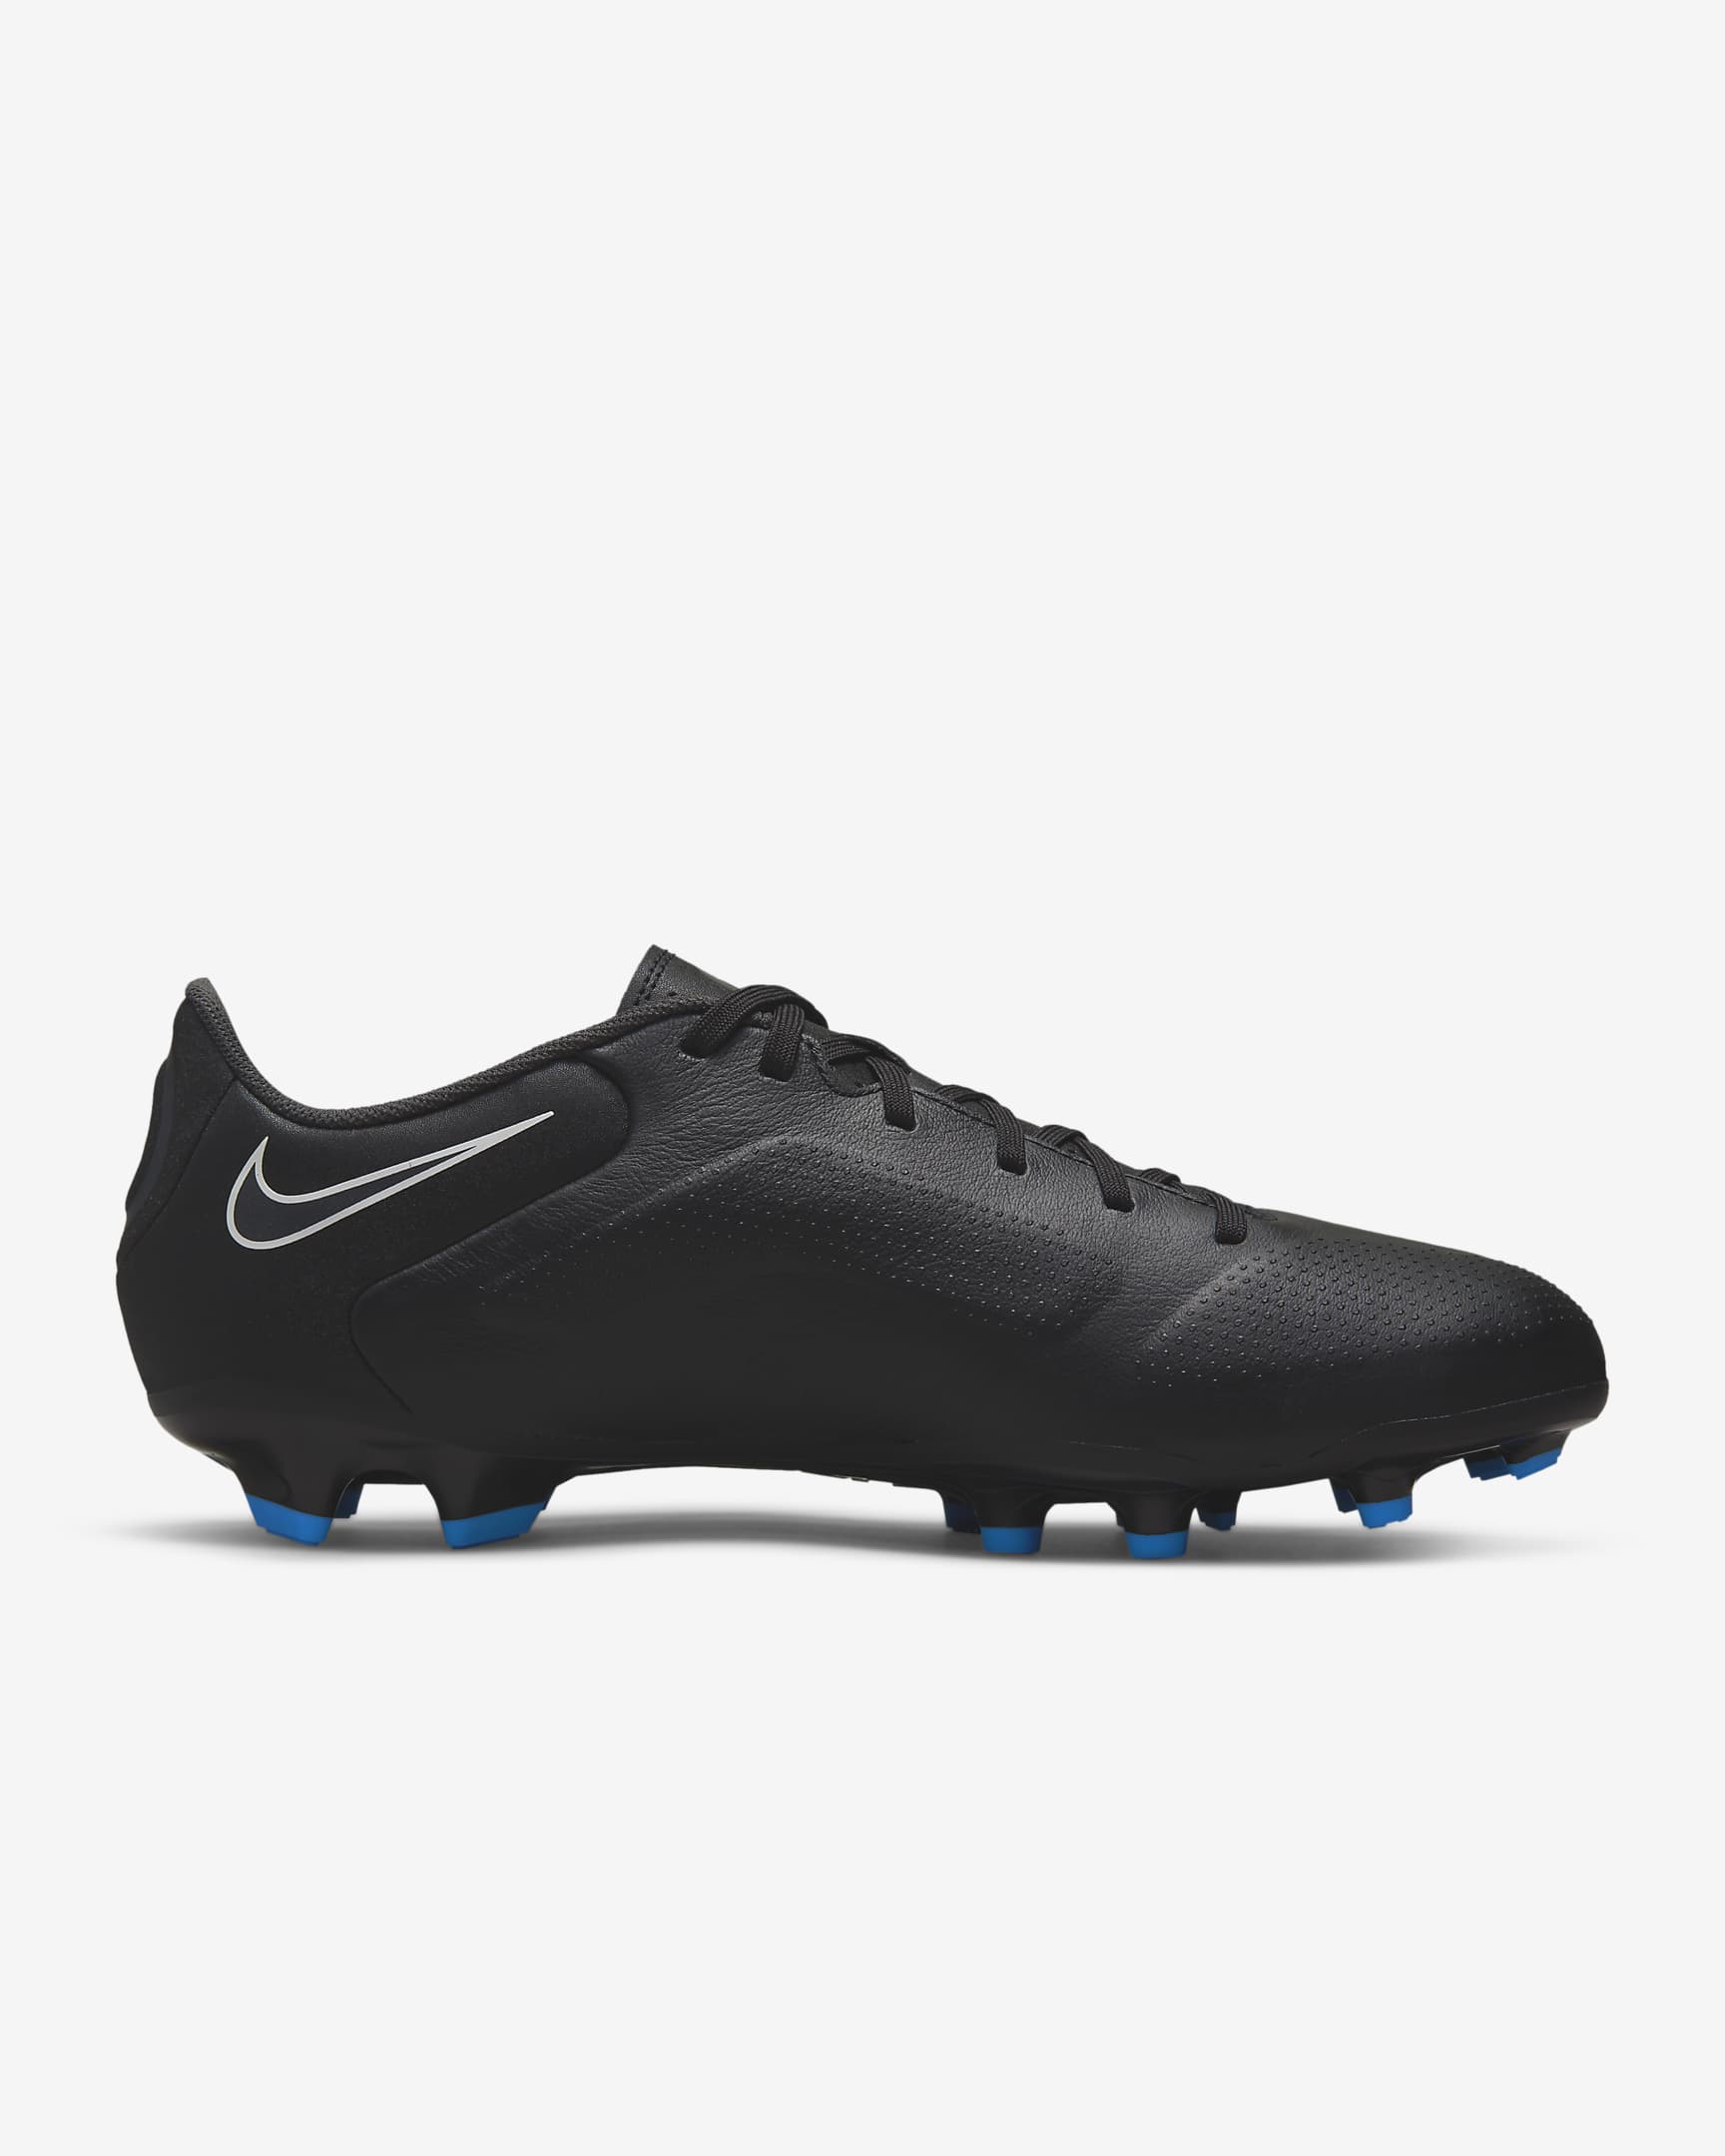 Nike Tiempo Legend 9 Academy MG Multi-Ground Football Boot. Nike IN